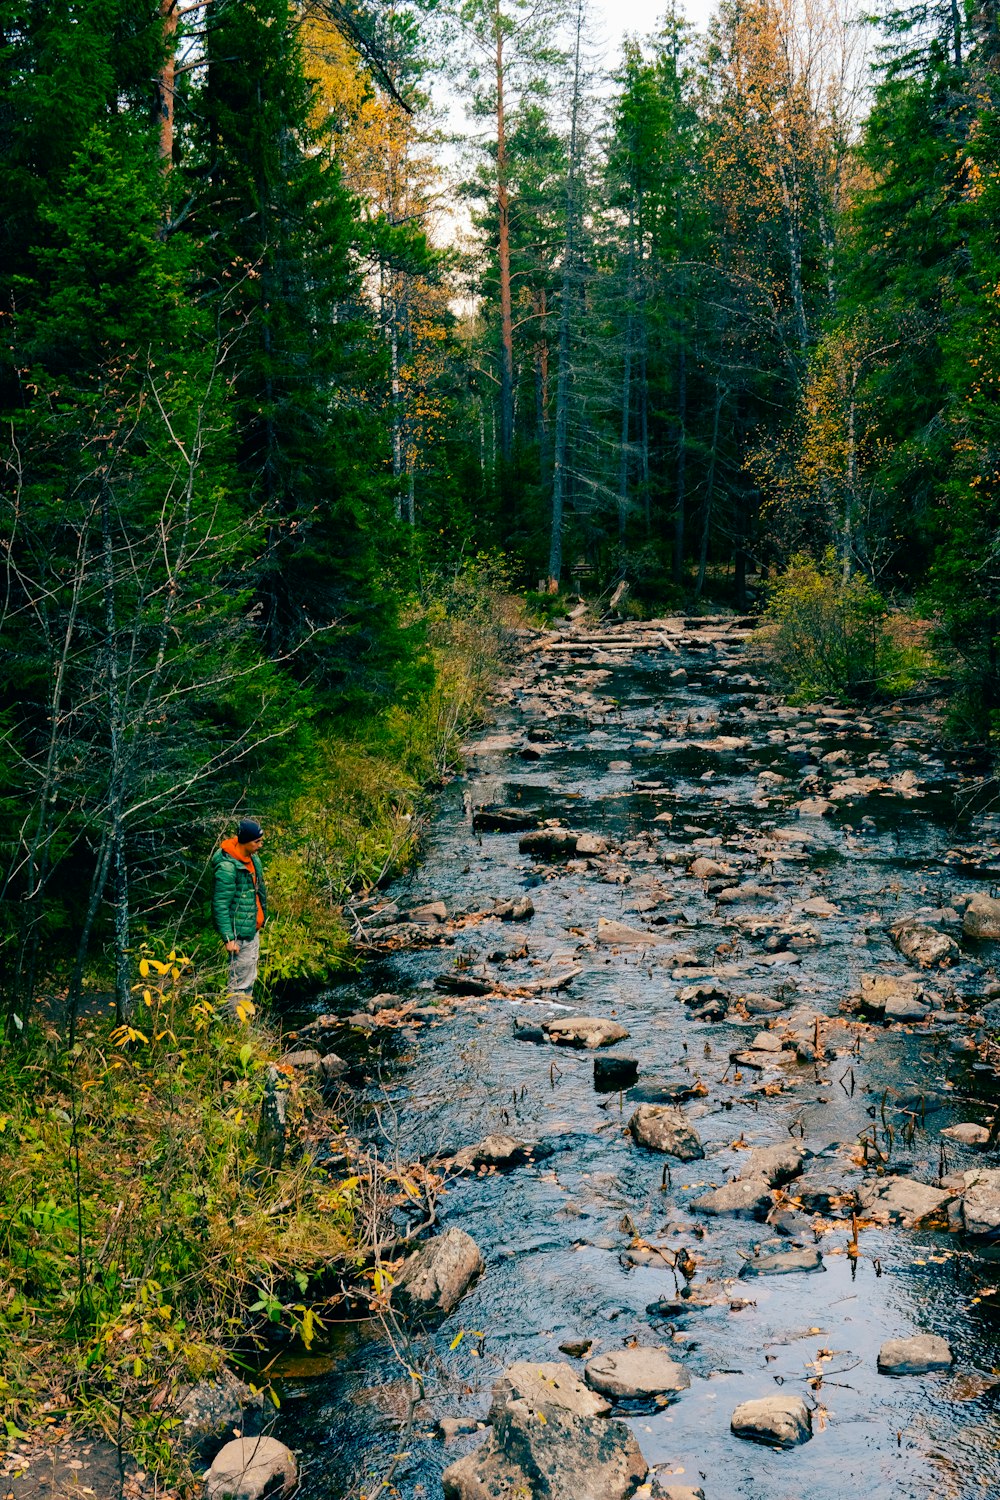 a person standing in a stream in a forest